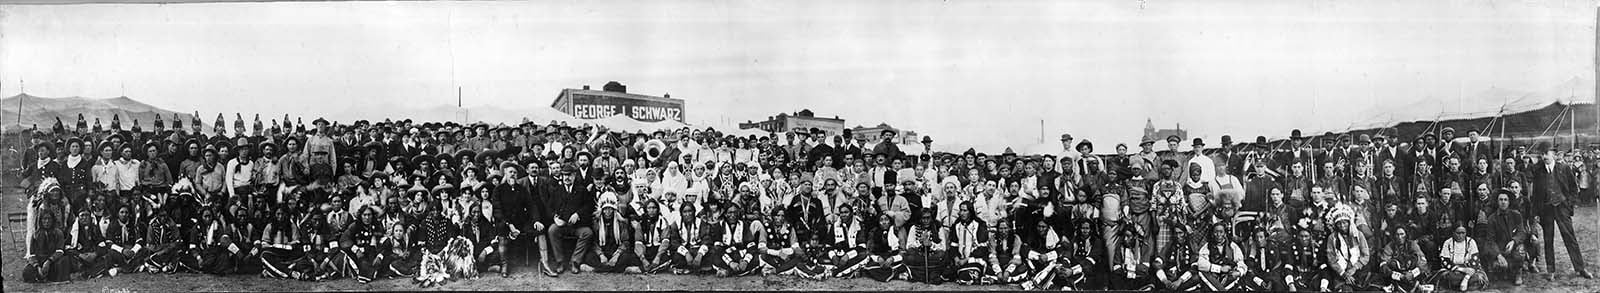 Cast photo, Buffalo Bill's Wild West and Pawnee Bill's Great Far East shows, 1912. MS 6 William F. Cody Collection. P.69.0016